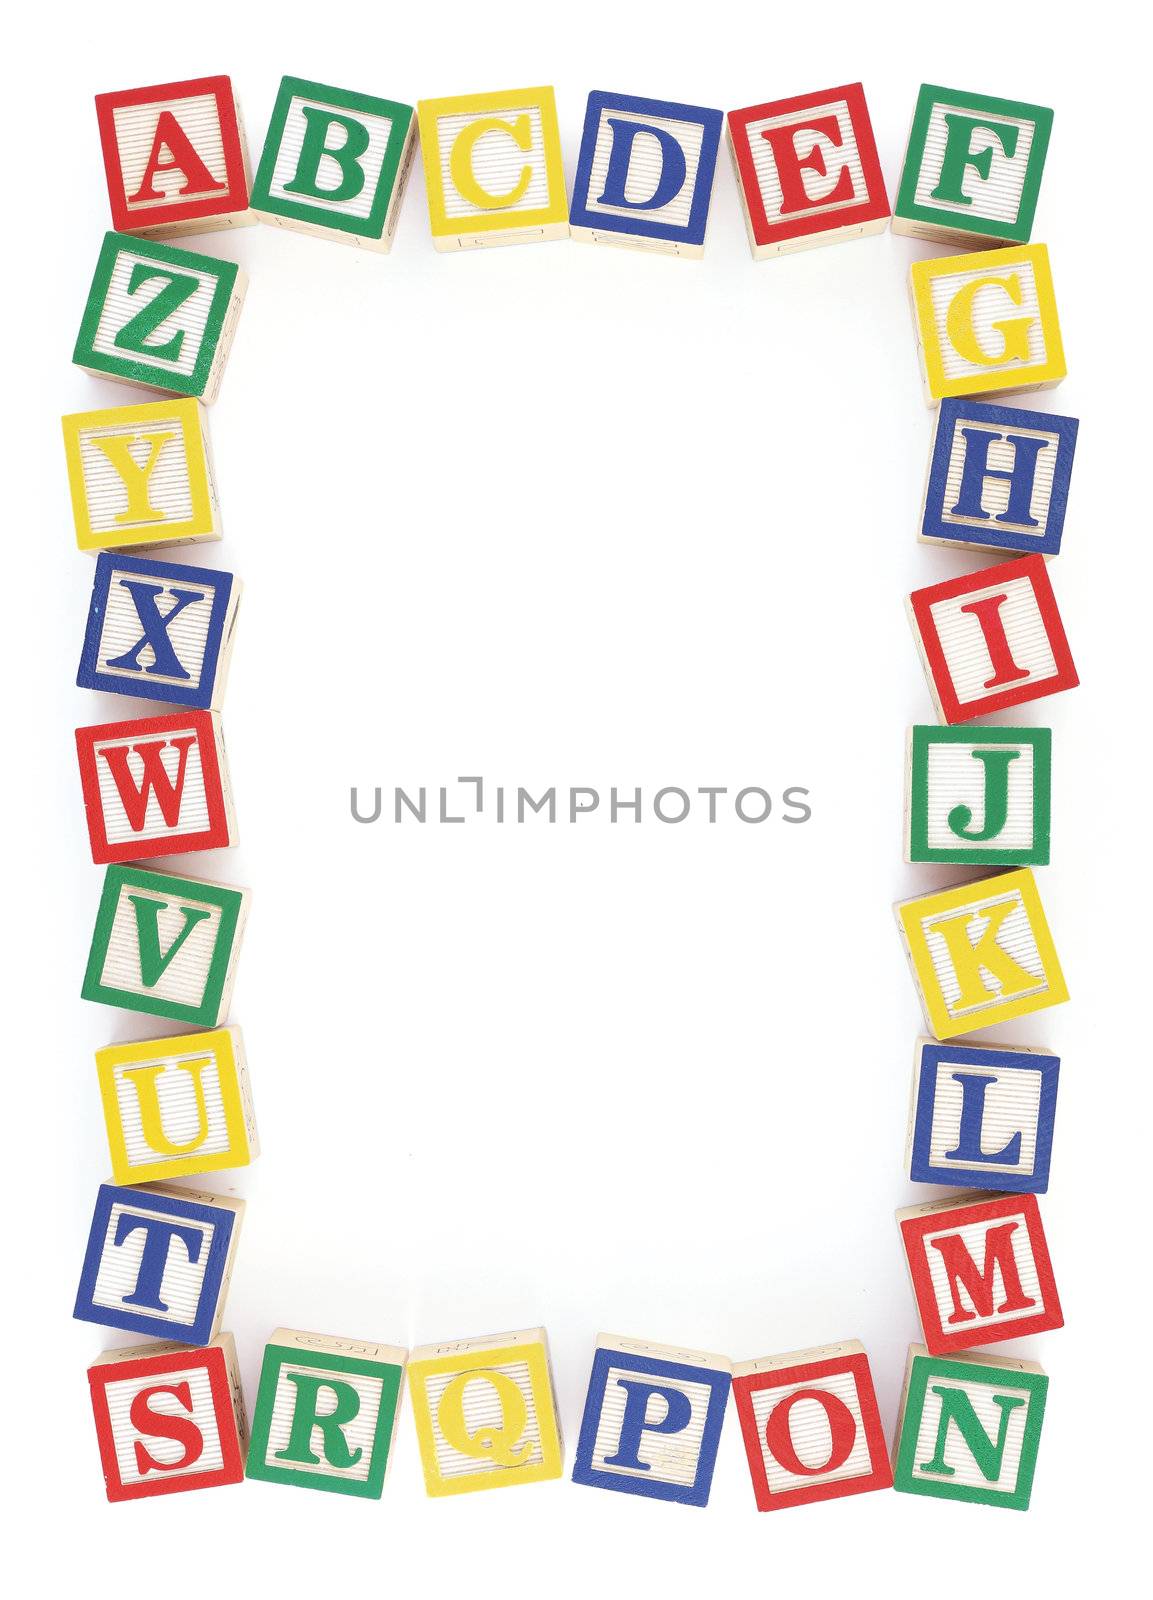 Wooden alphabet blocks arranged to create a frame on a white background